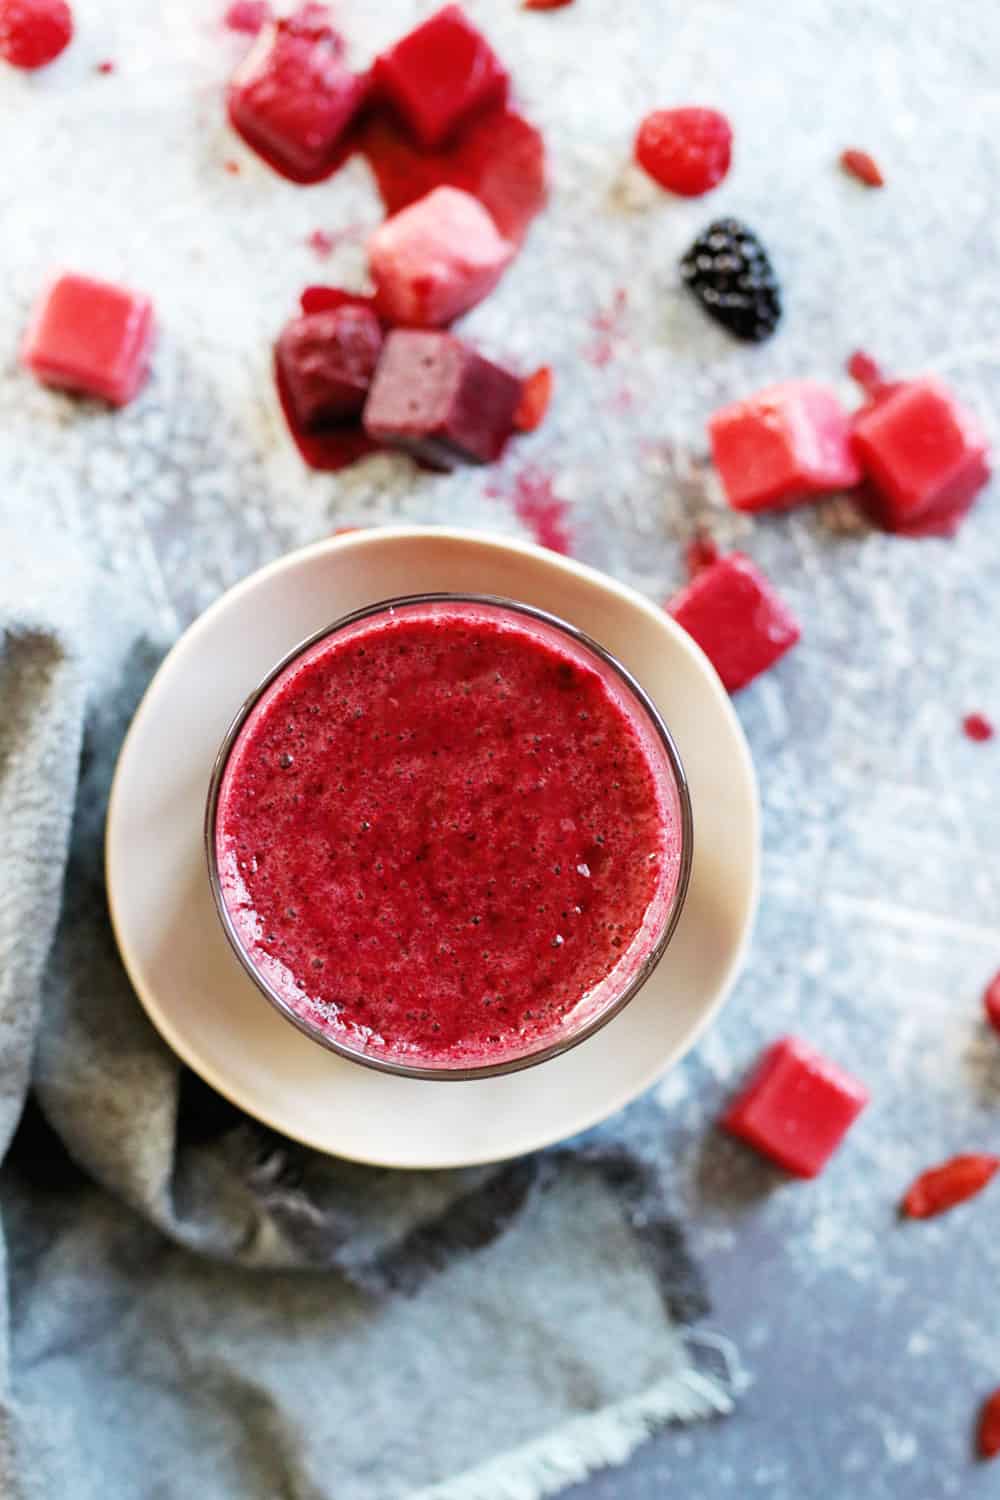 Get a Boost of Superfood Nutrition With These Smoothie Bombs